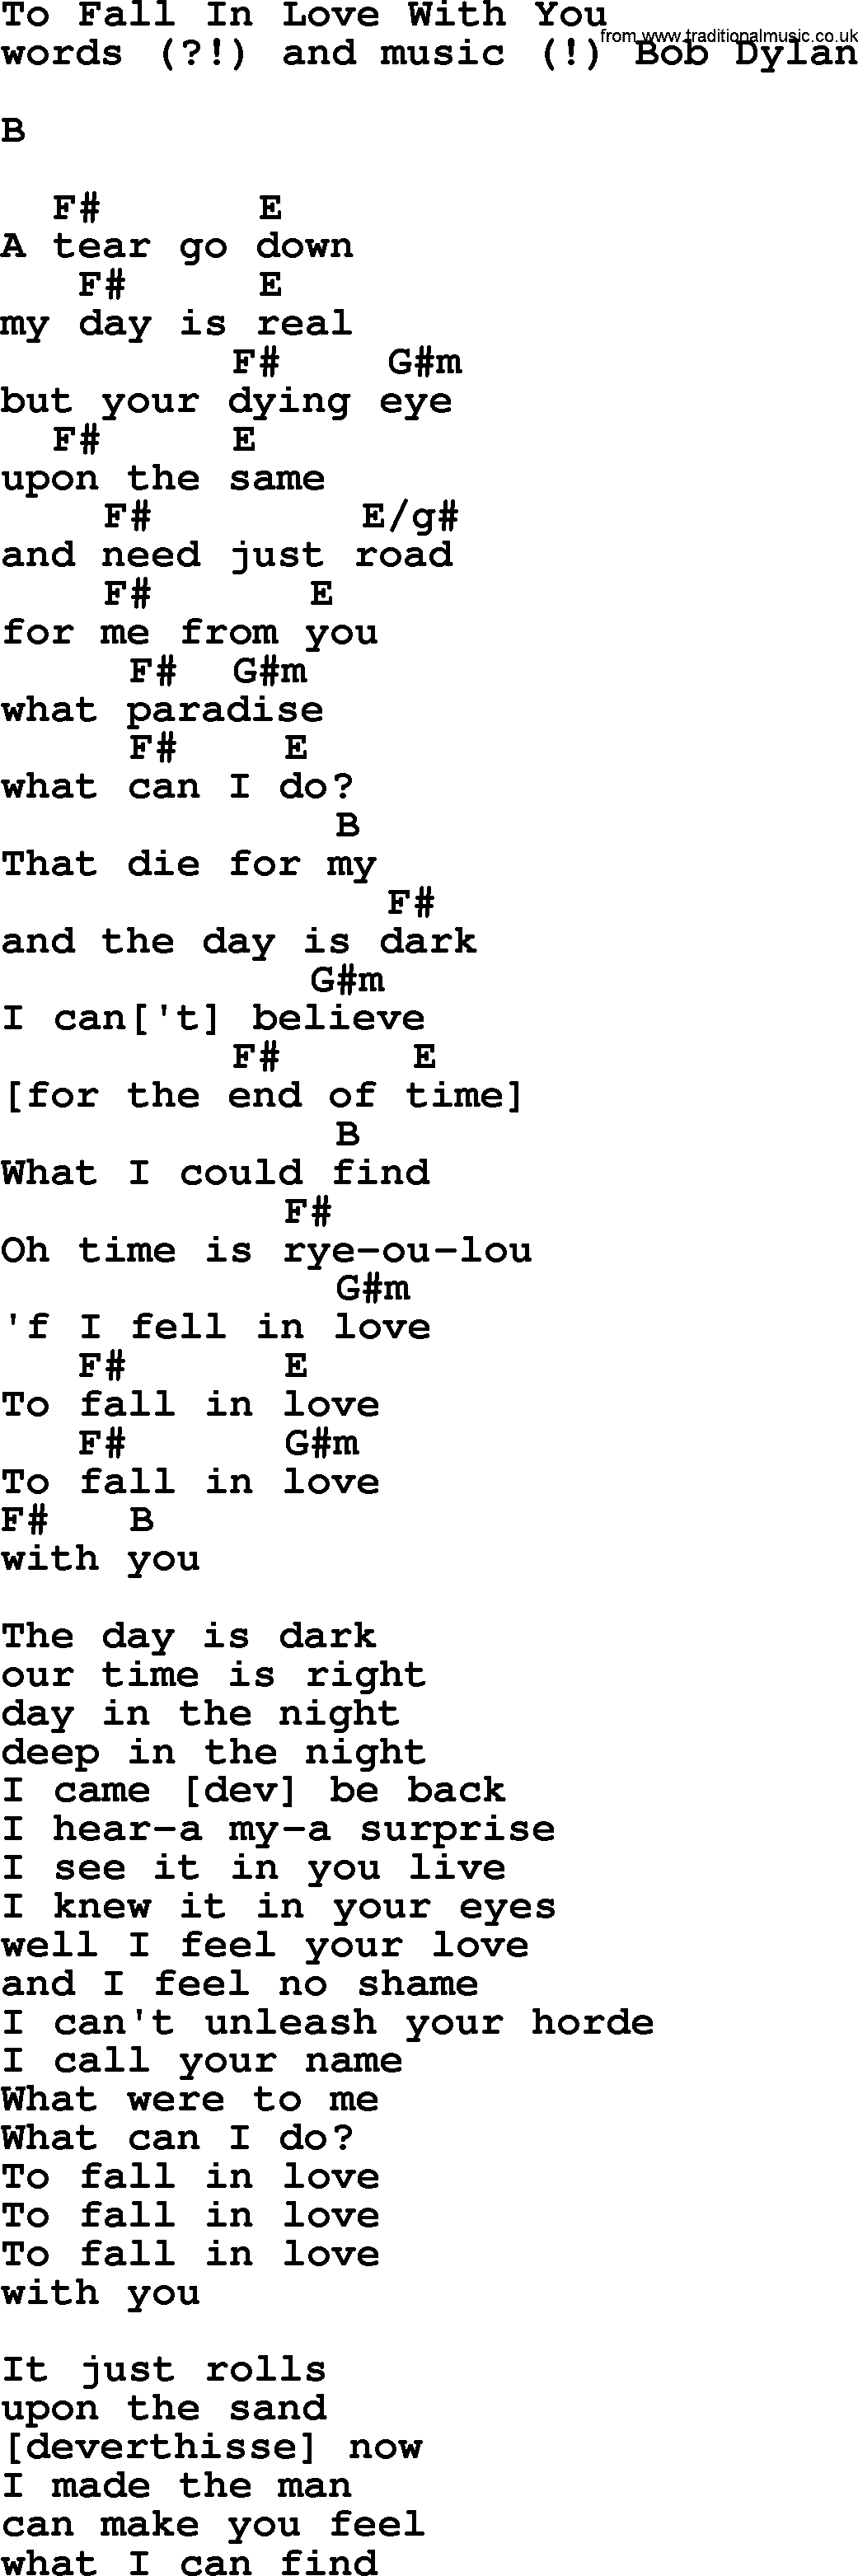 Bob Dylan song, lyrics with chords - To Fall In Love With You